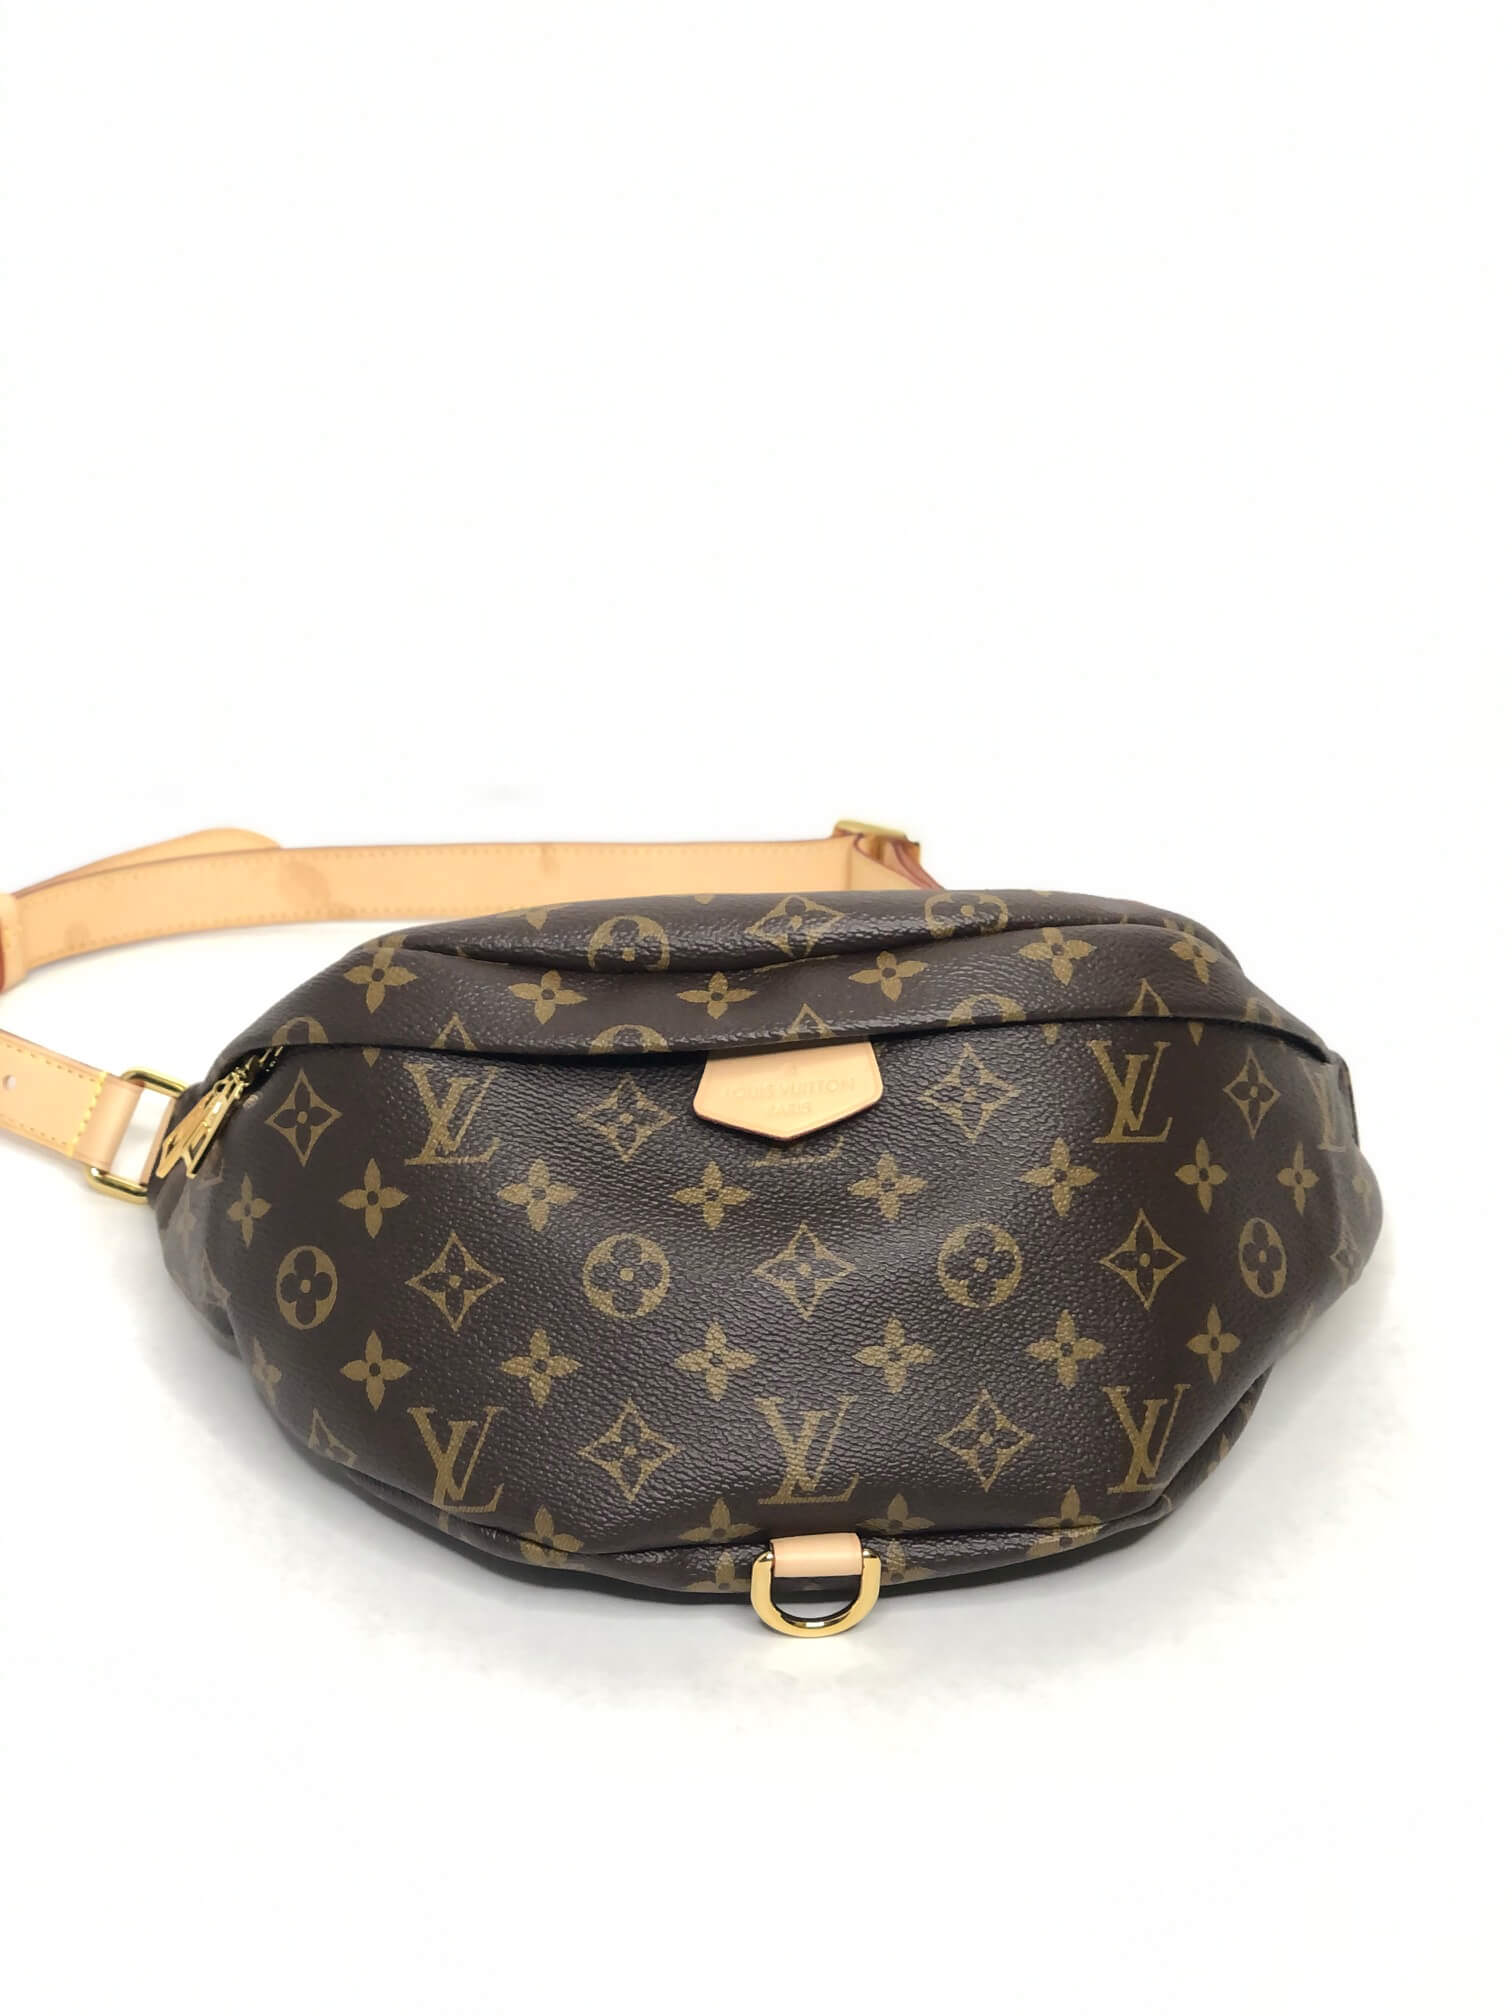 Dark Brown Braided Leather Bum Bag with LV